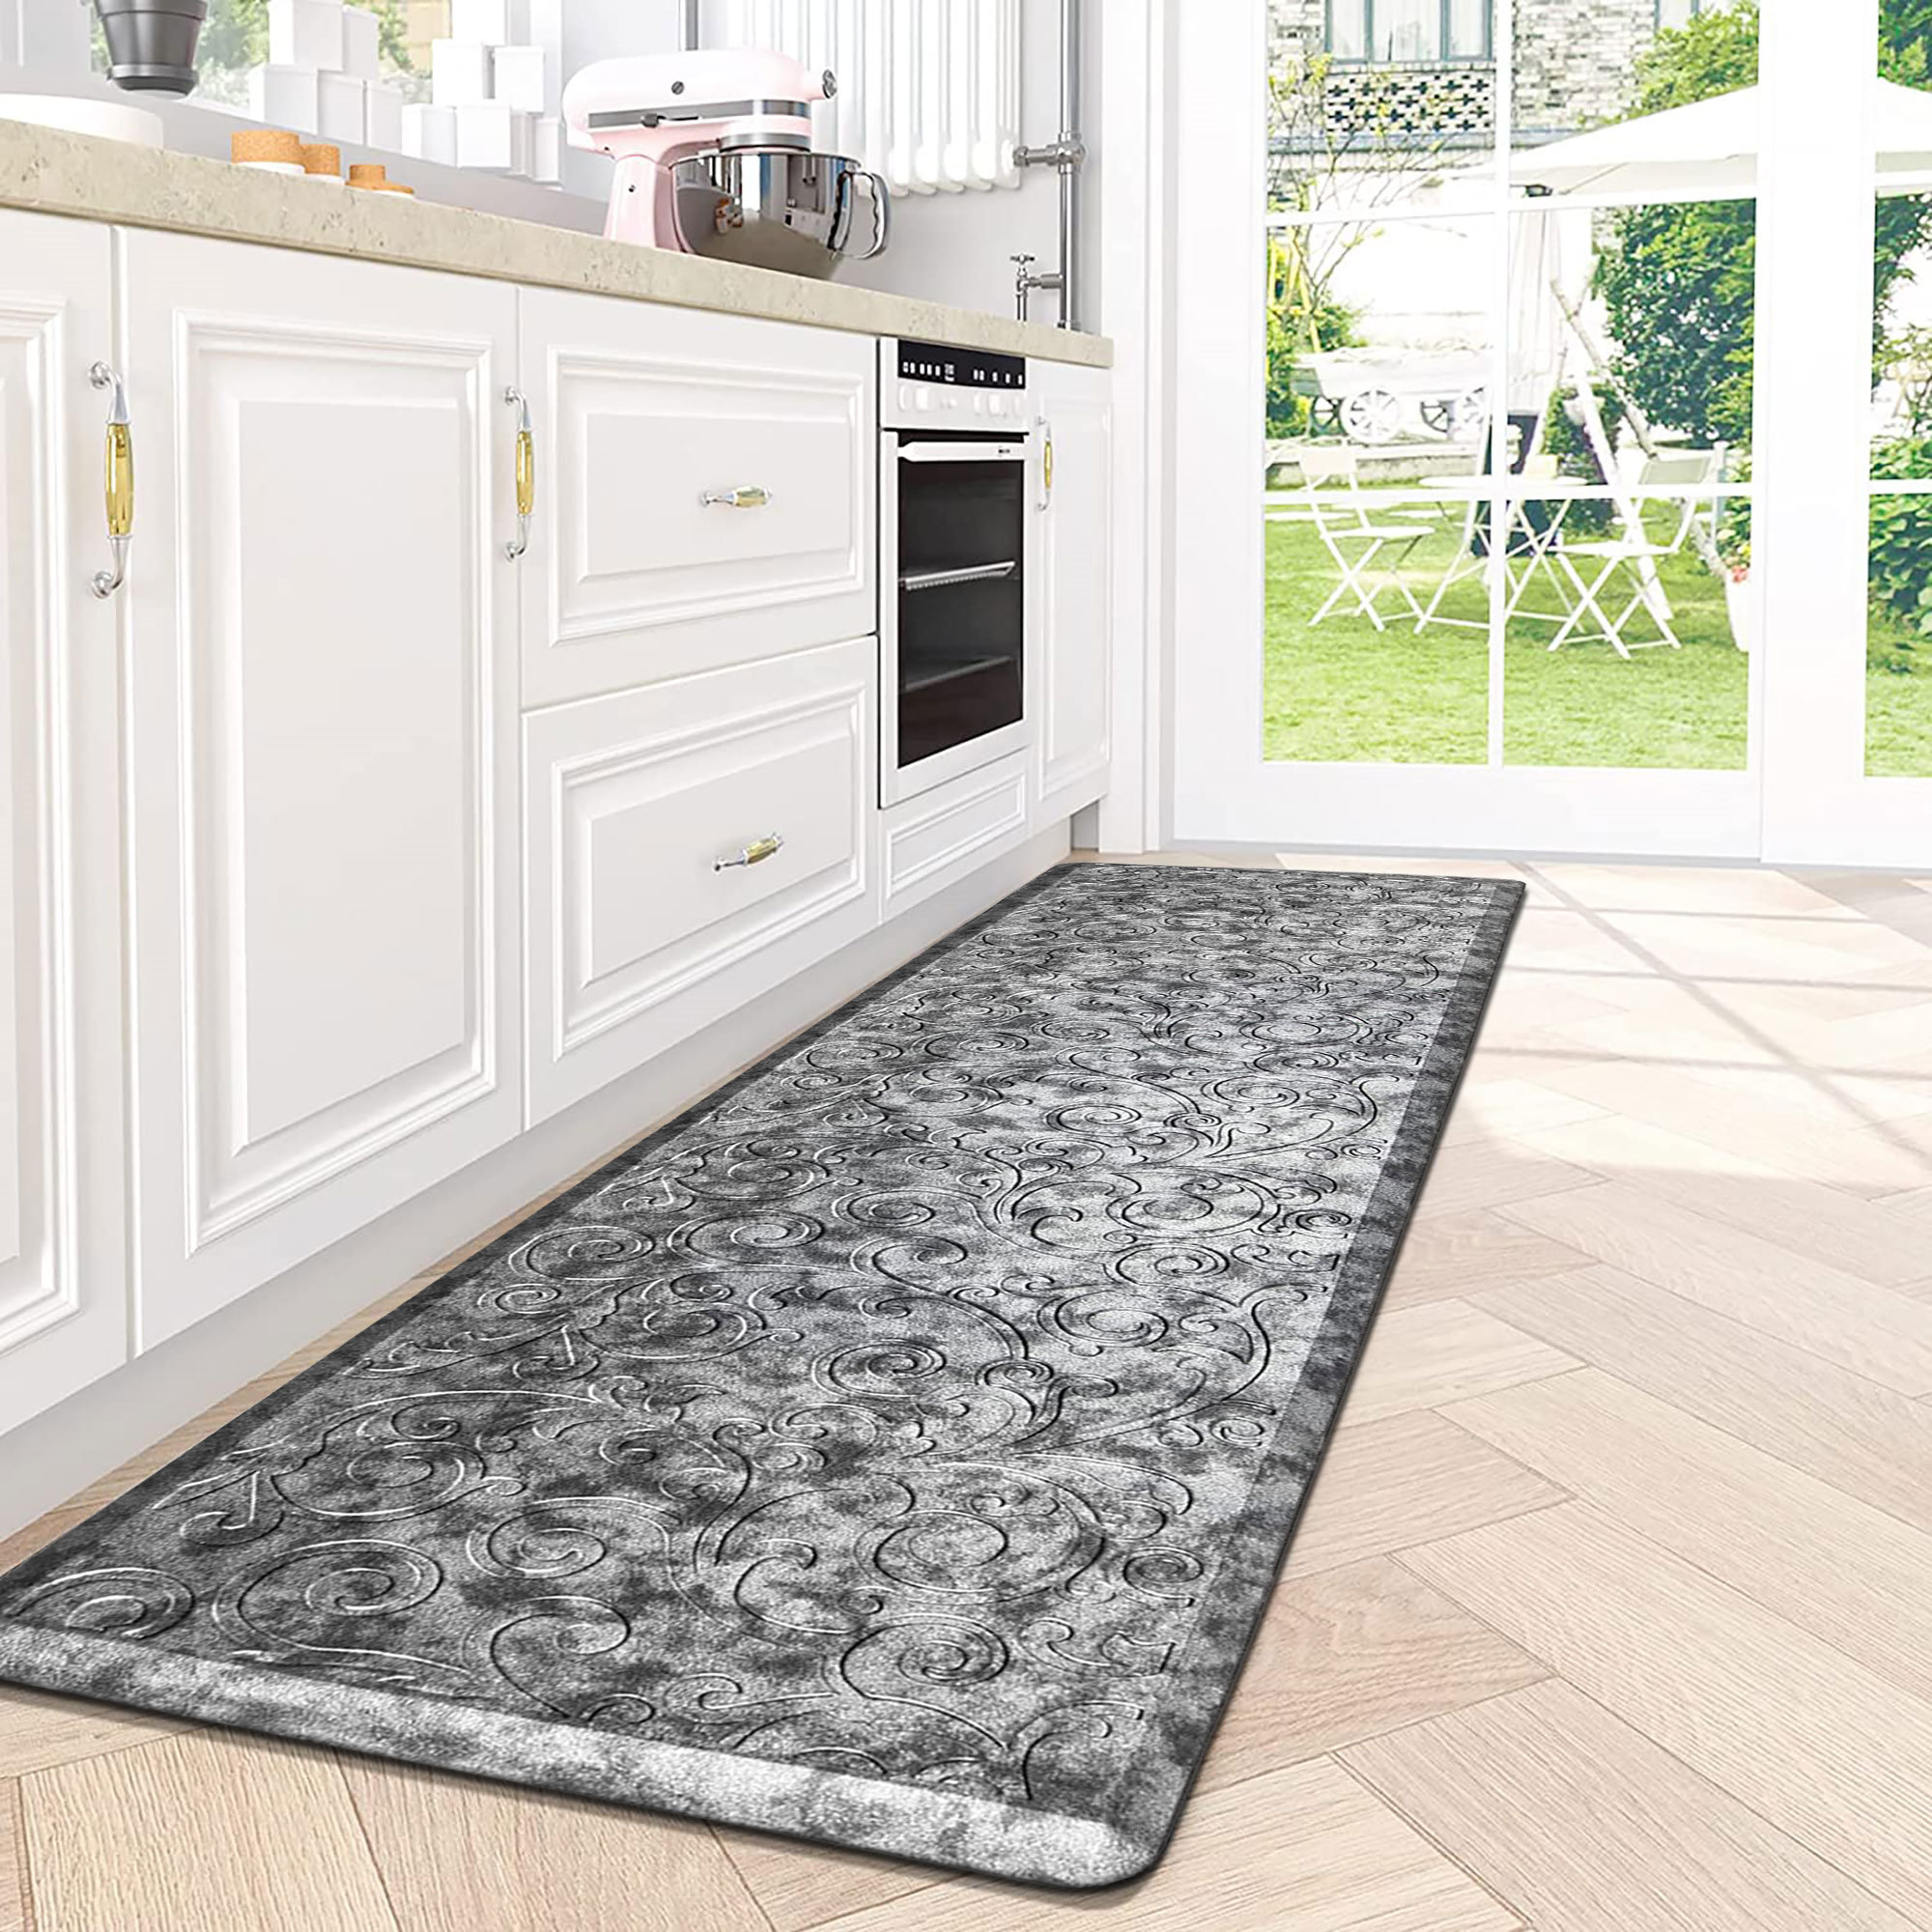 HEBE Anti Fatigue Kitchen Mat Set of 2 Non Slip Thick Cushioned Kitchen Rug Sets 2 Piece Waterproof Kitchen Runner Set Heavy Duty Comfort Standing Mats Wipeable 